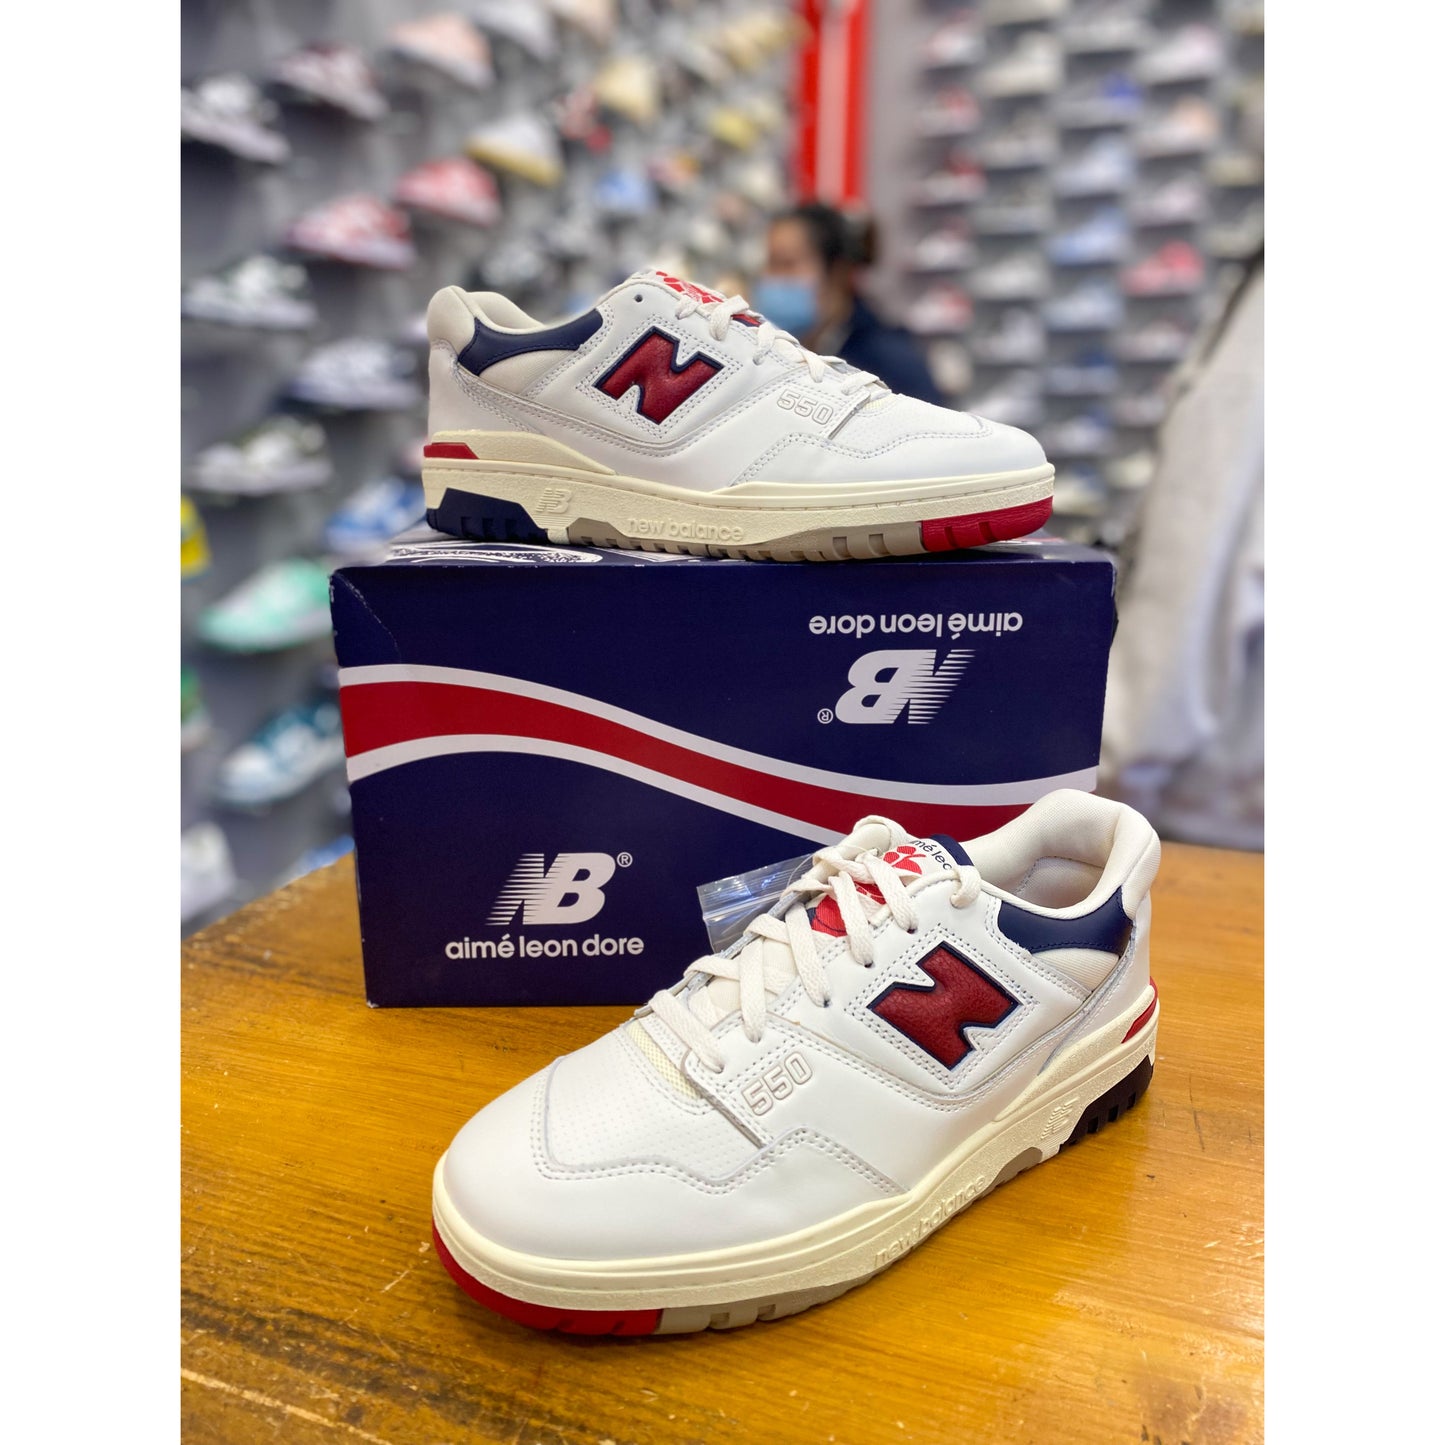 New Balance 550 Aime Leon Dore White Navy Red from New Balance